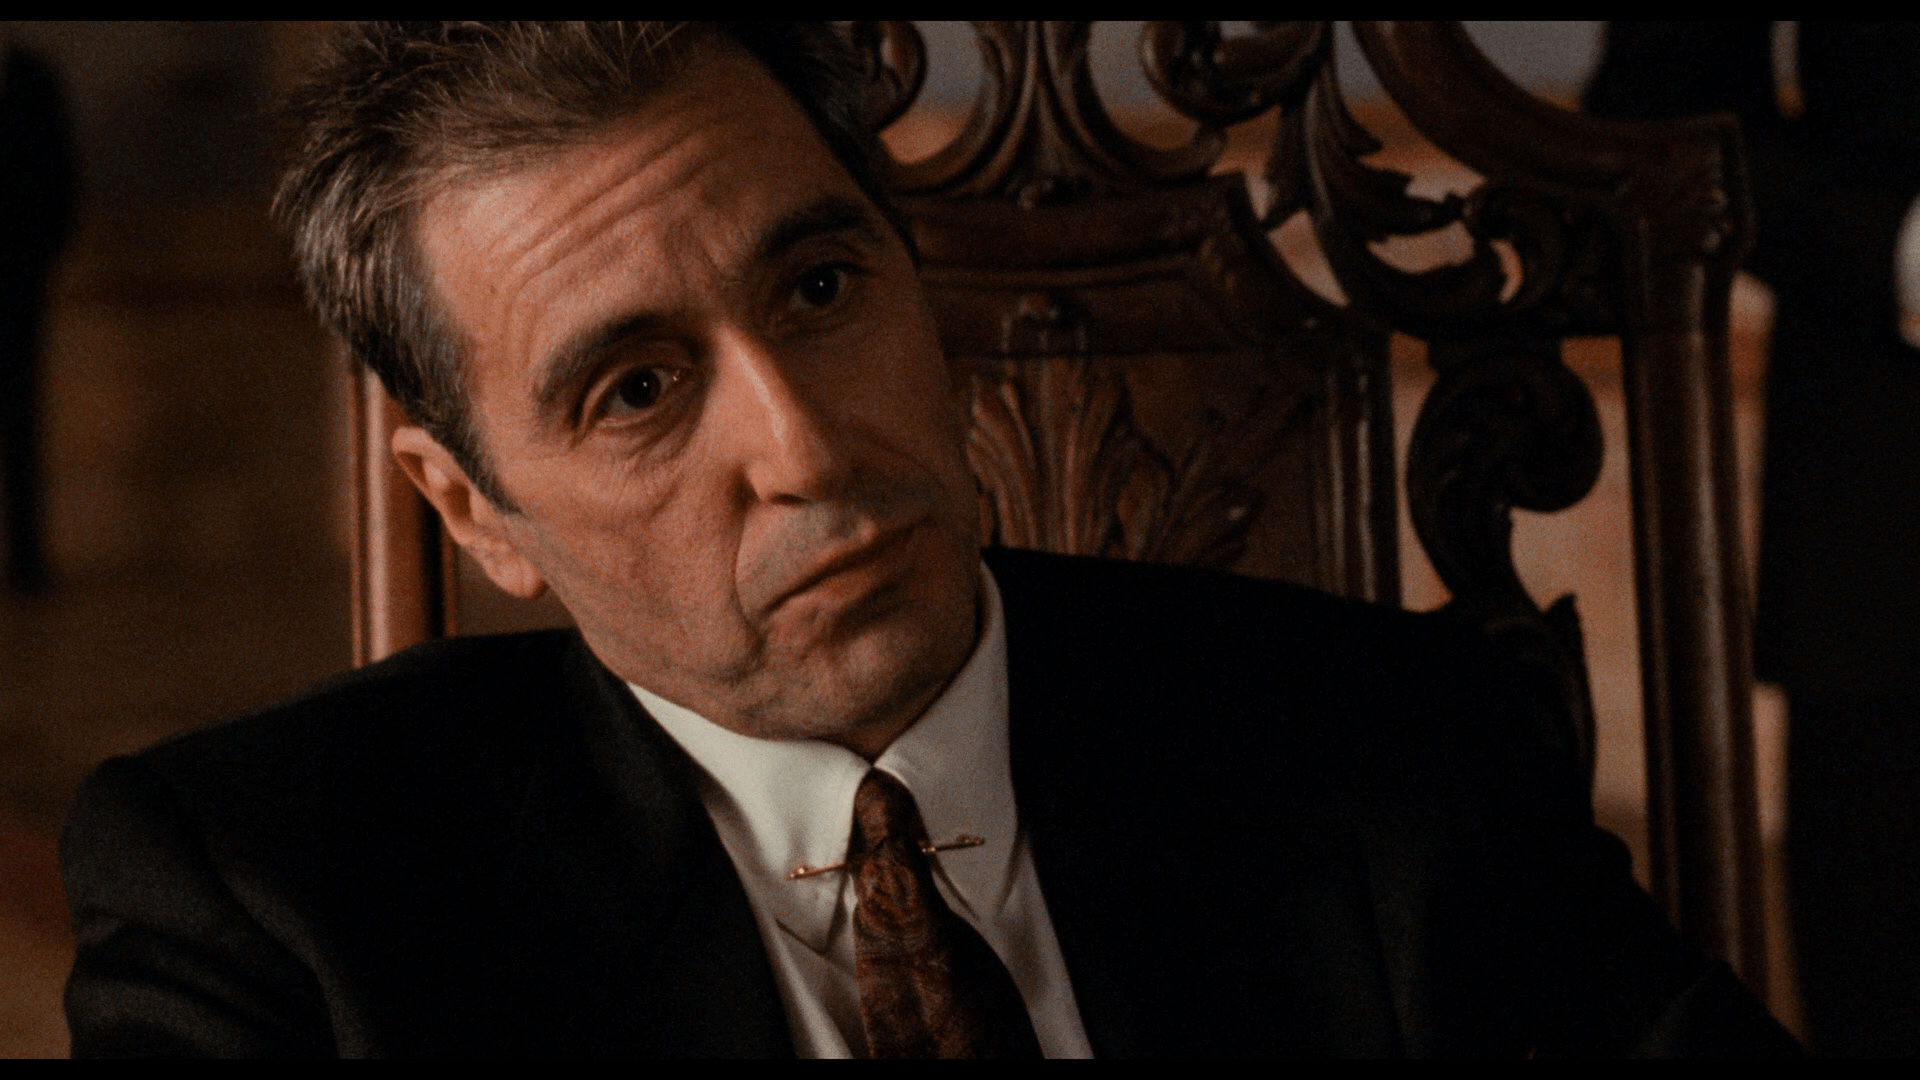 The Godfather Coda: The Death of Michael Corleone (2020) [Blu-ray review] 8